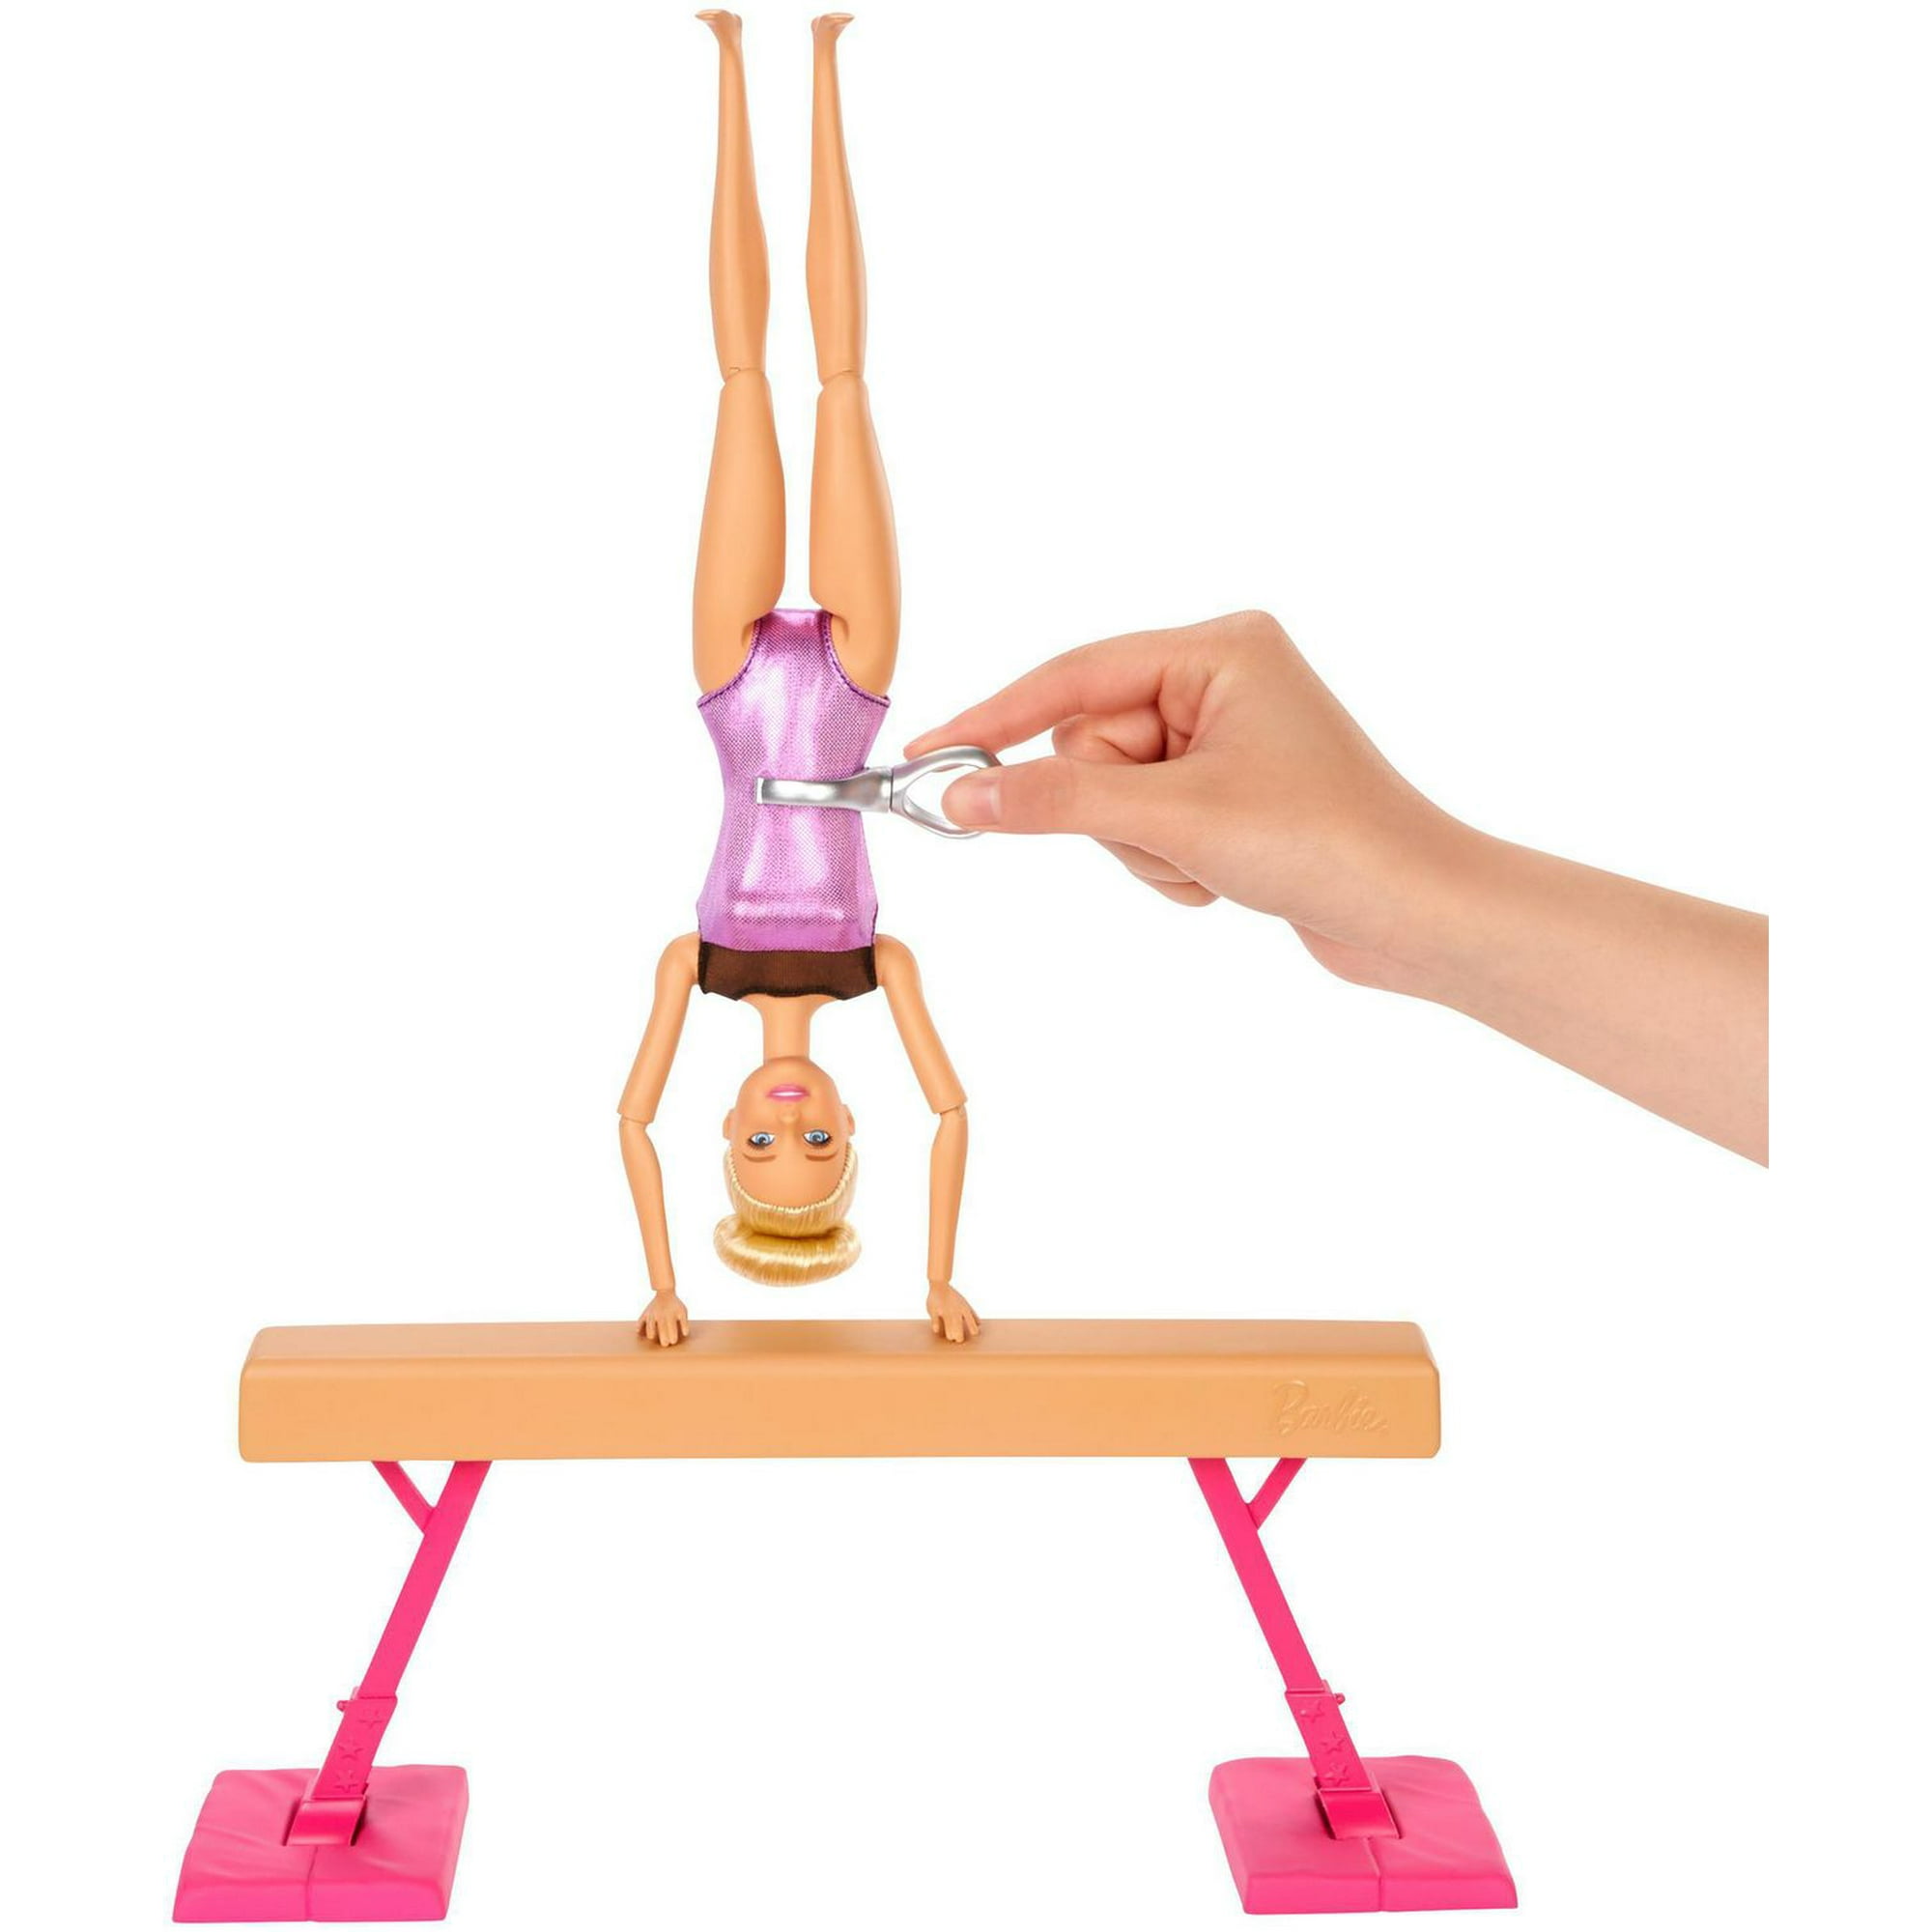 Barbie Gymnastics Doll & Accessories, Playset with Blonde Fashion Doll,  C-Clip for Flipping Action, Balance Beam, Warm-Up Suit & More